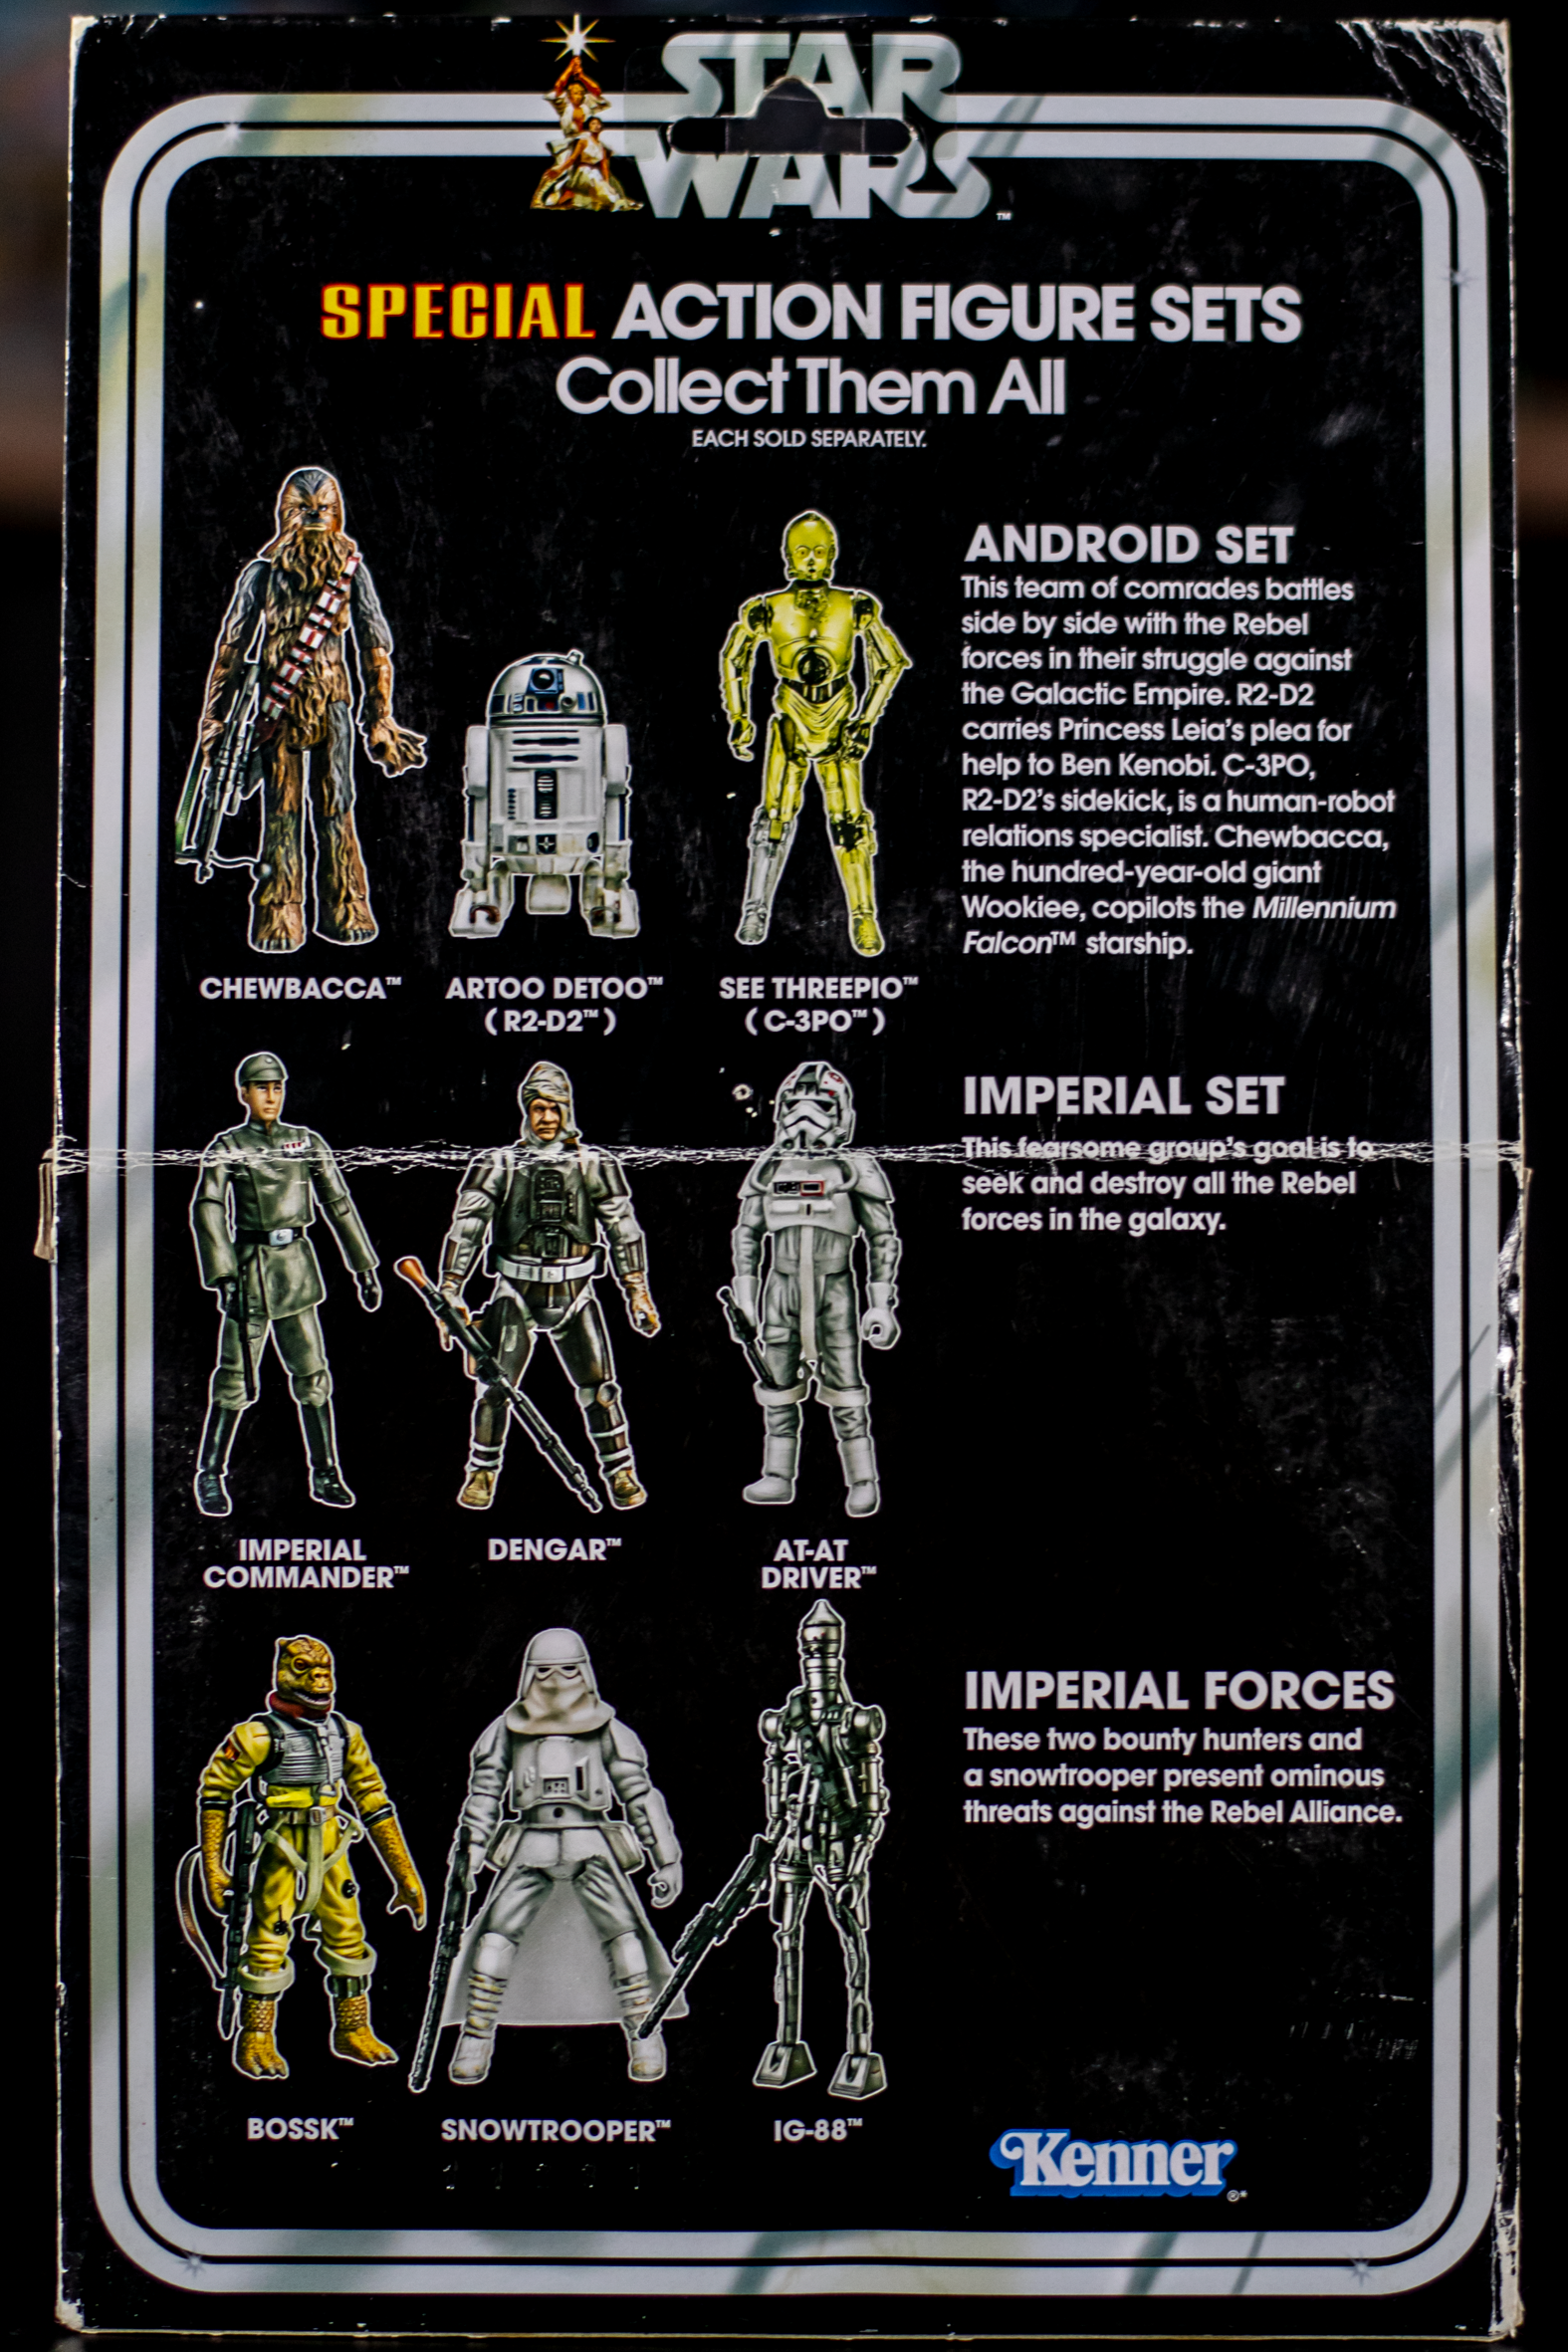 Star Wars: Special Action Figures Set "Android Set"